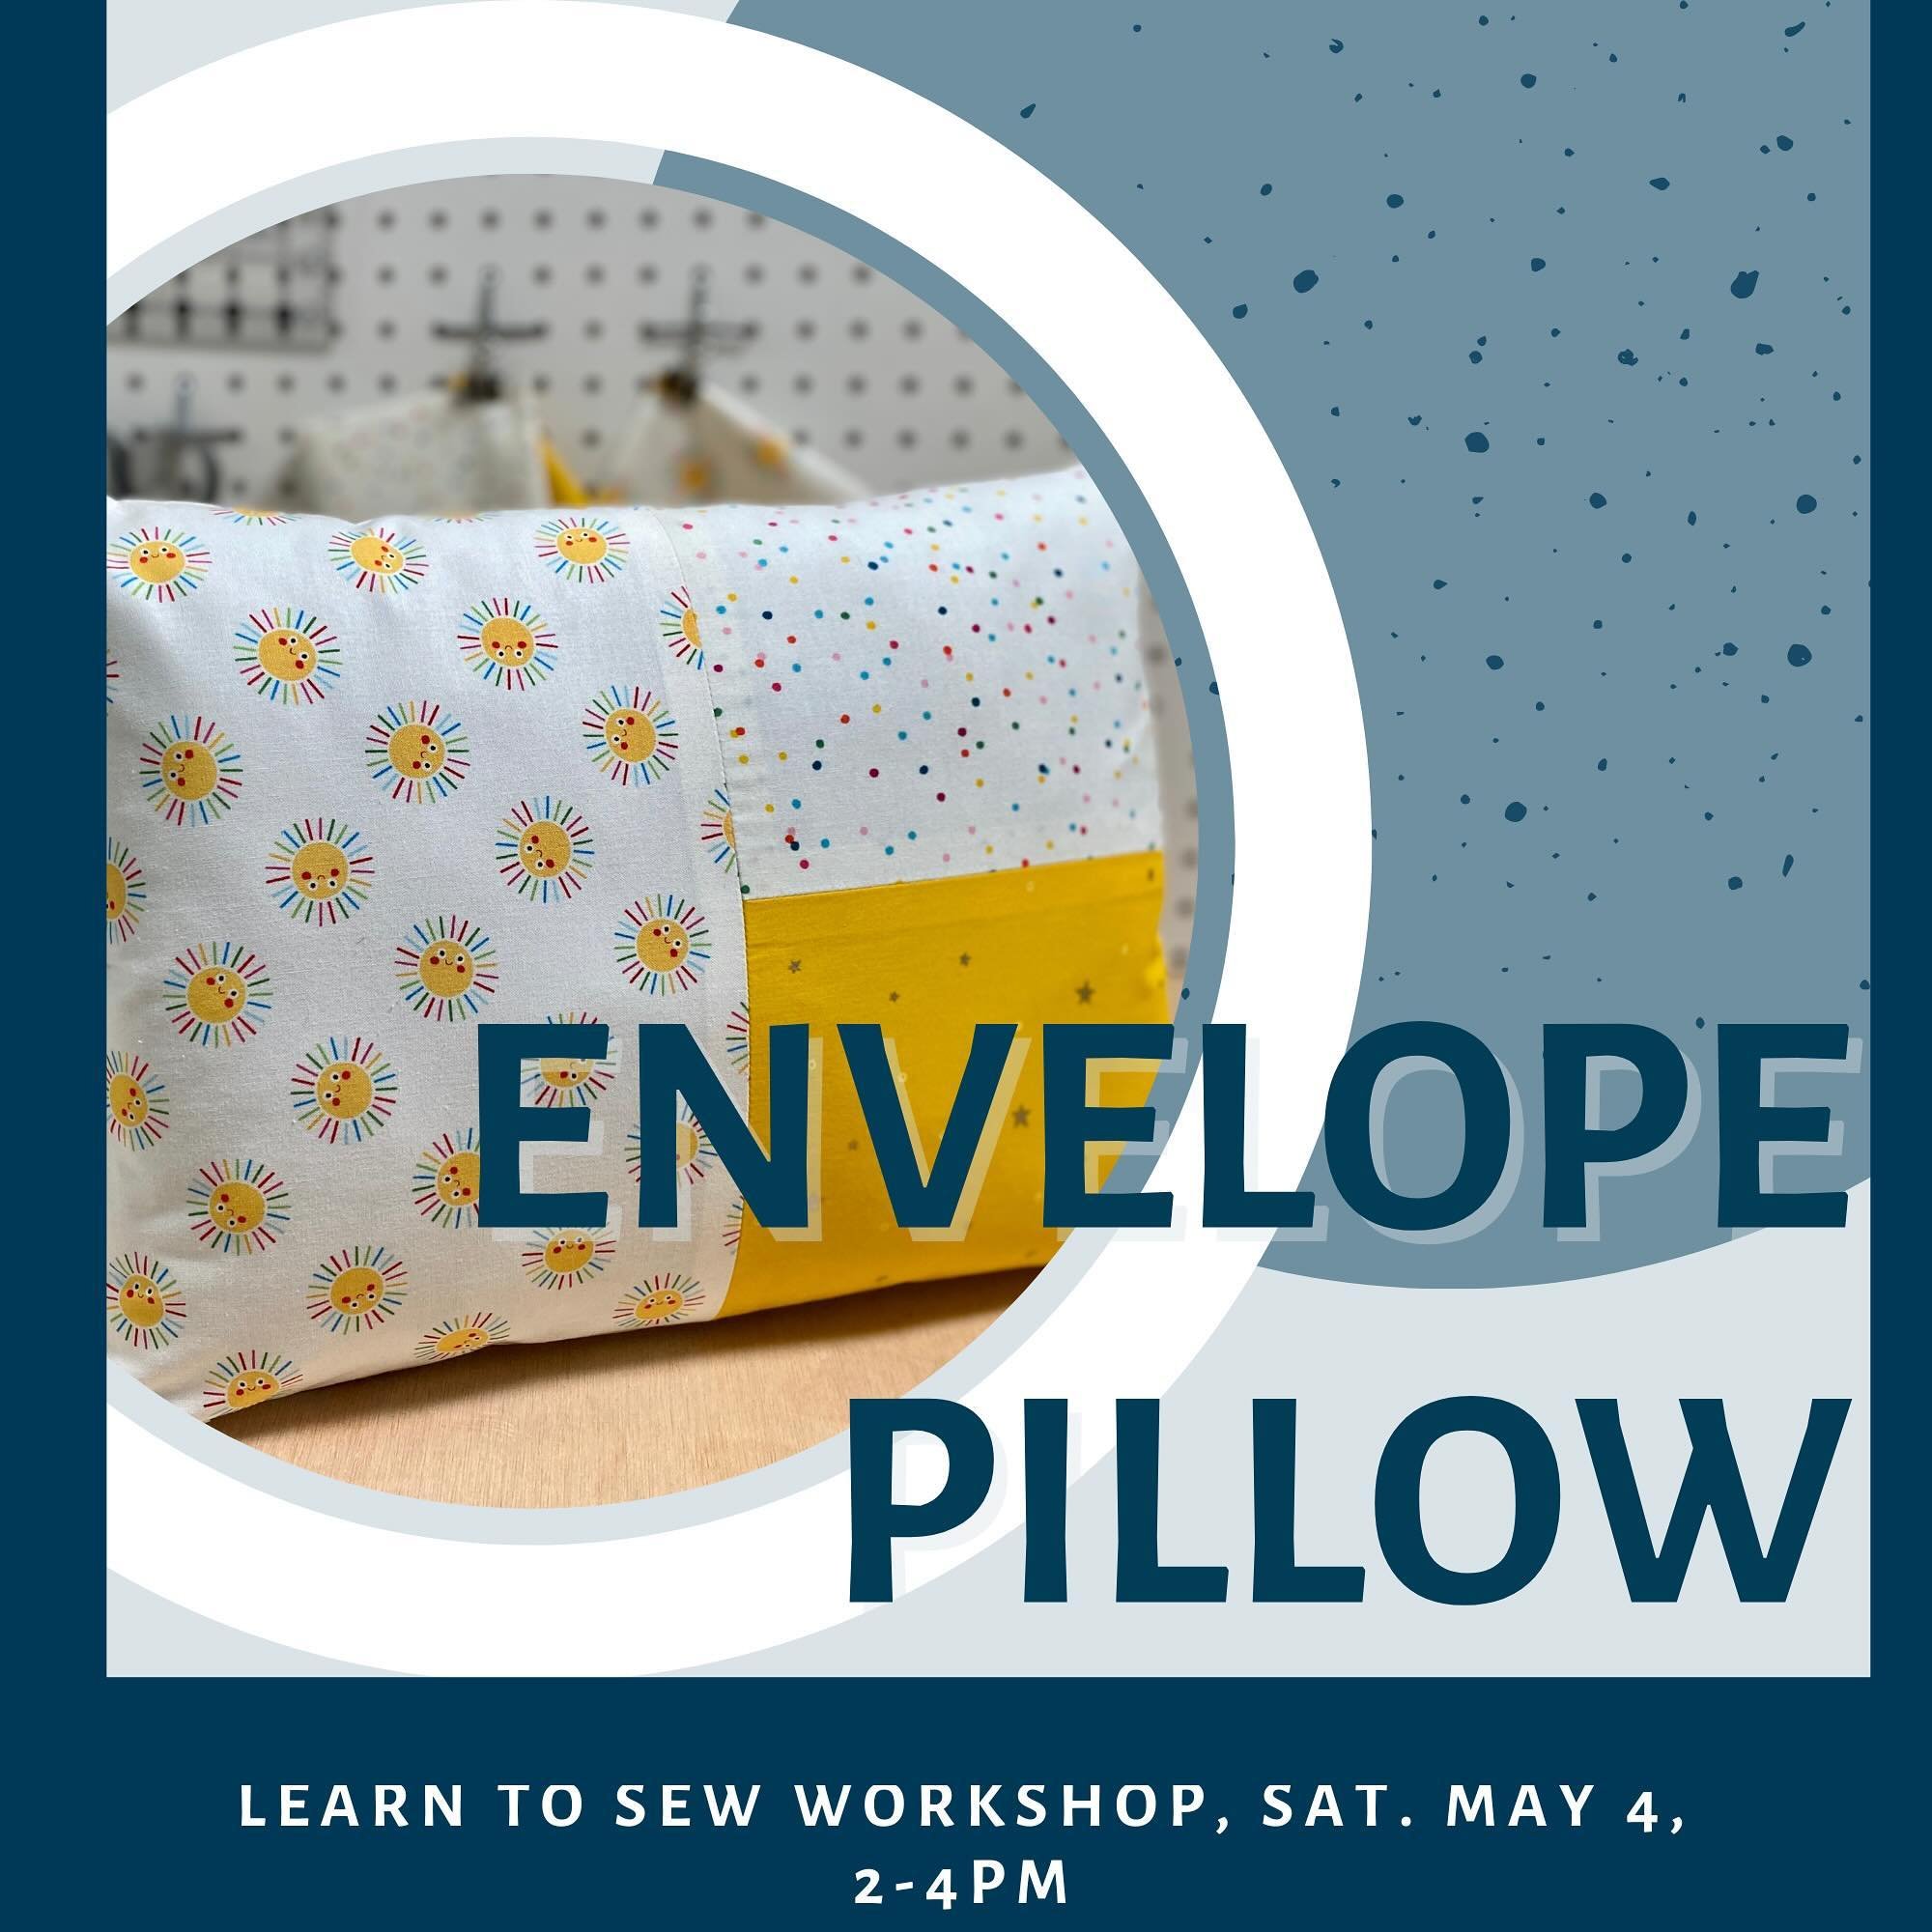 Learn basic sewing machine features, as you sew an envelope pillow. 🧵🪡This learn to sew workshop will get you started on your sewing journey. You will learn how to cut properly, how to stitch straight lines, and how to thread a sewing machine. 

Yo